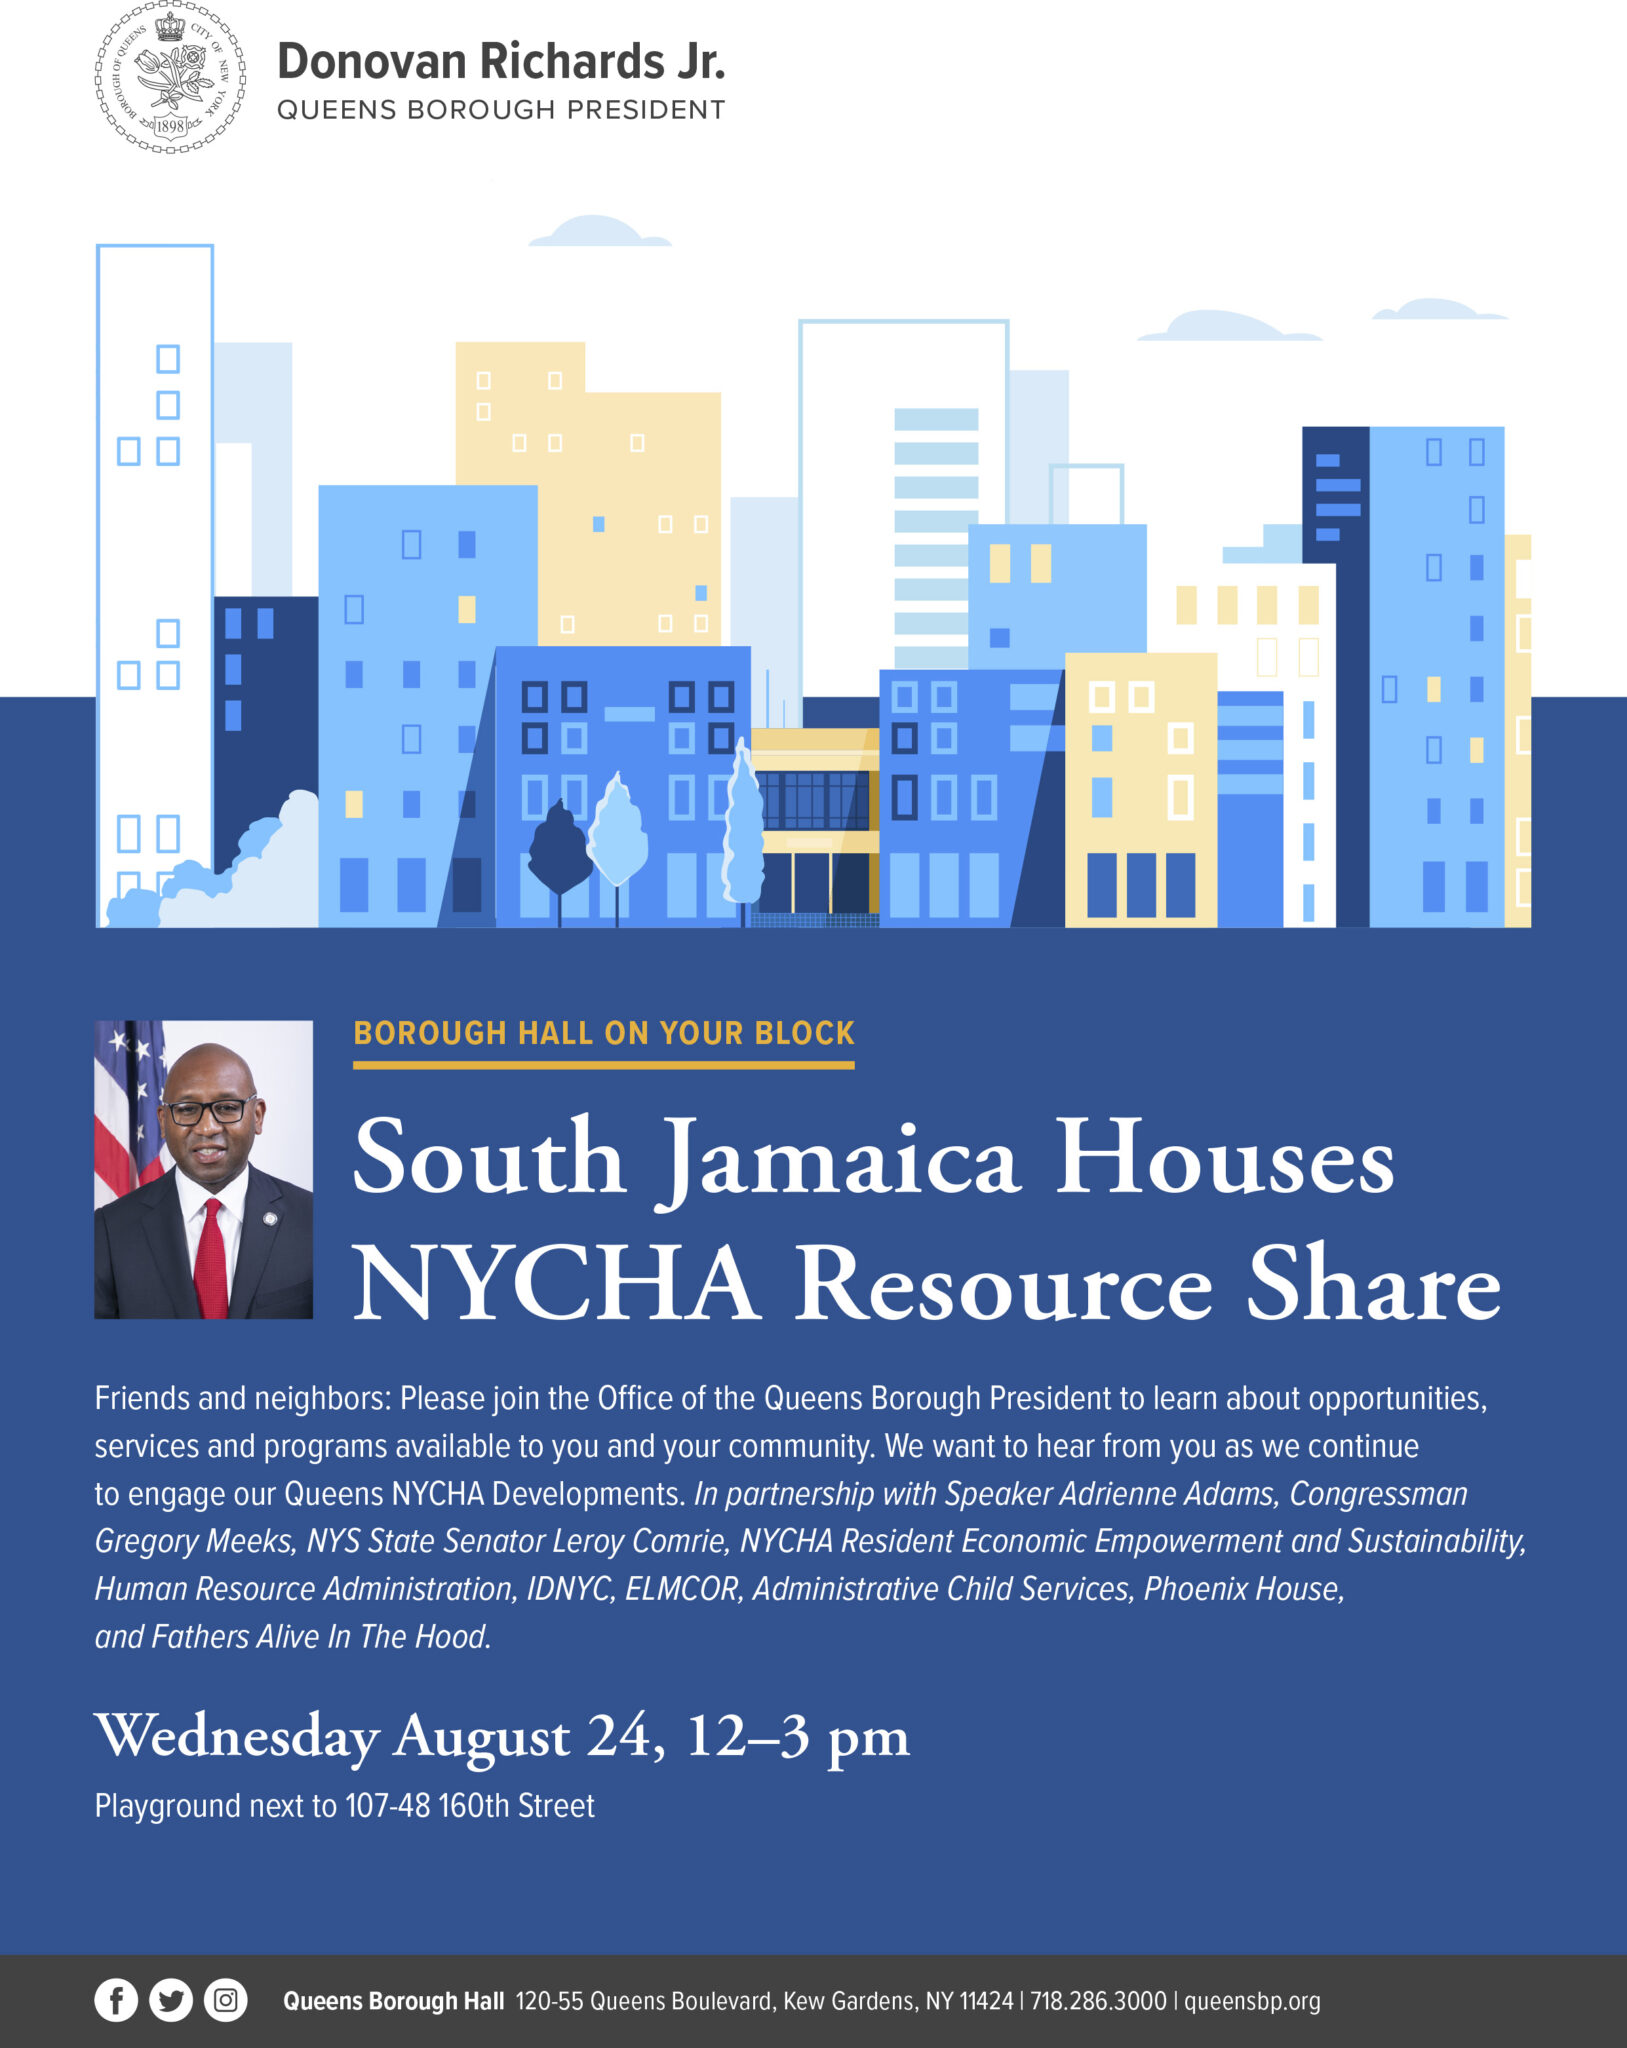 South Jamaica Houses NYCHA Resource Share Council For Airport Opportunity